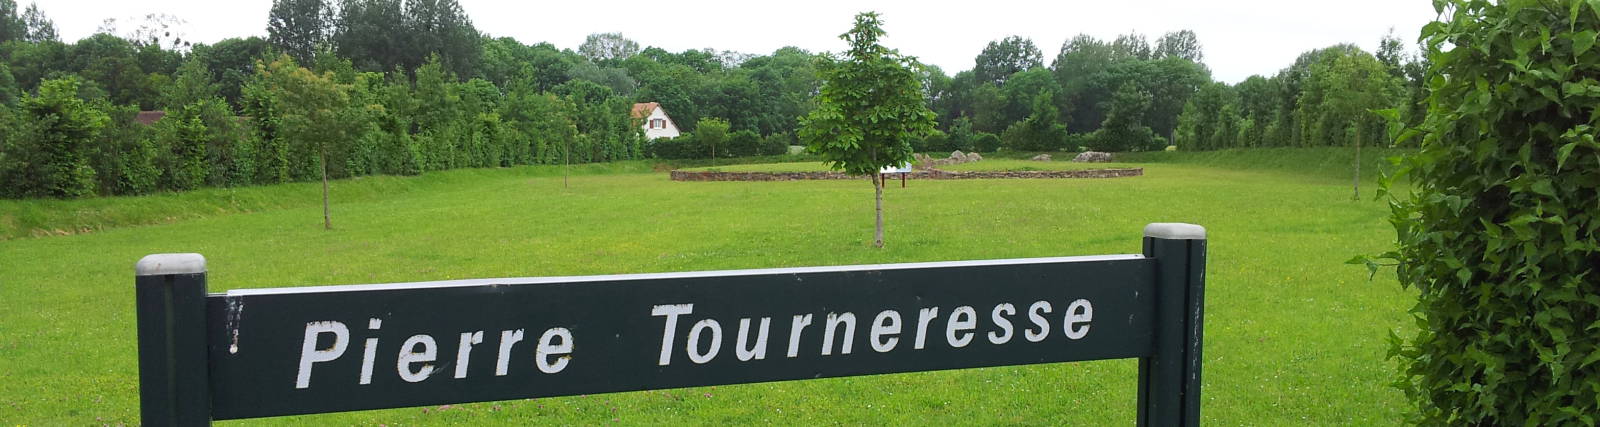 Sign at the entrance to the Pierre Tourneresse neolithic passage grave.